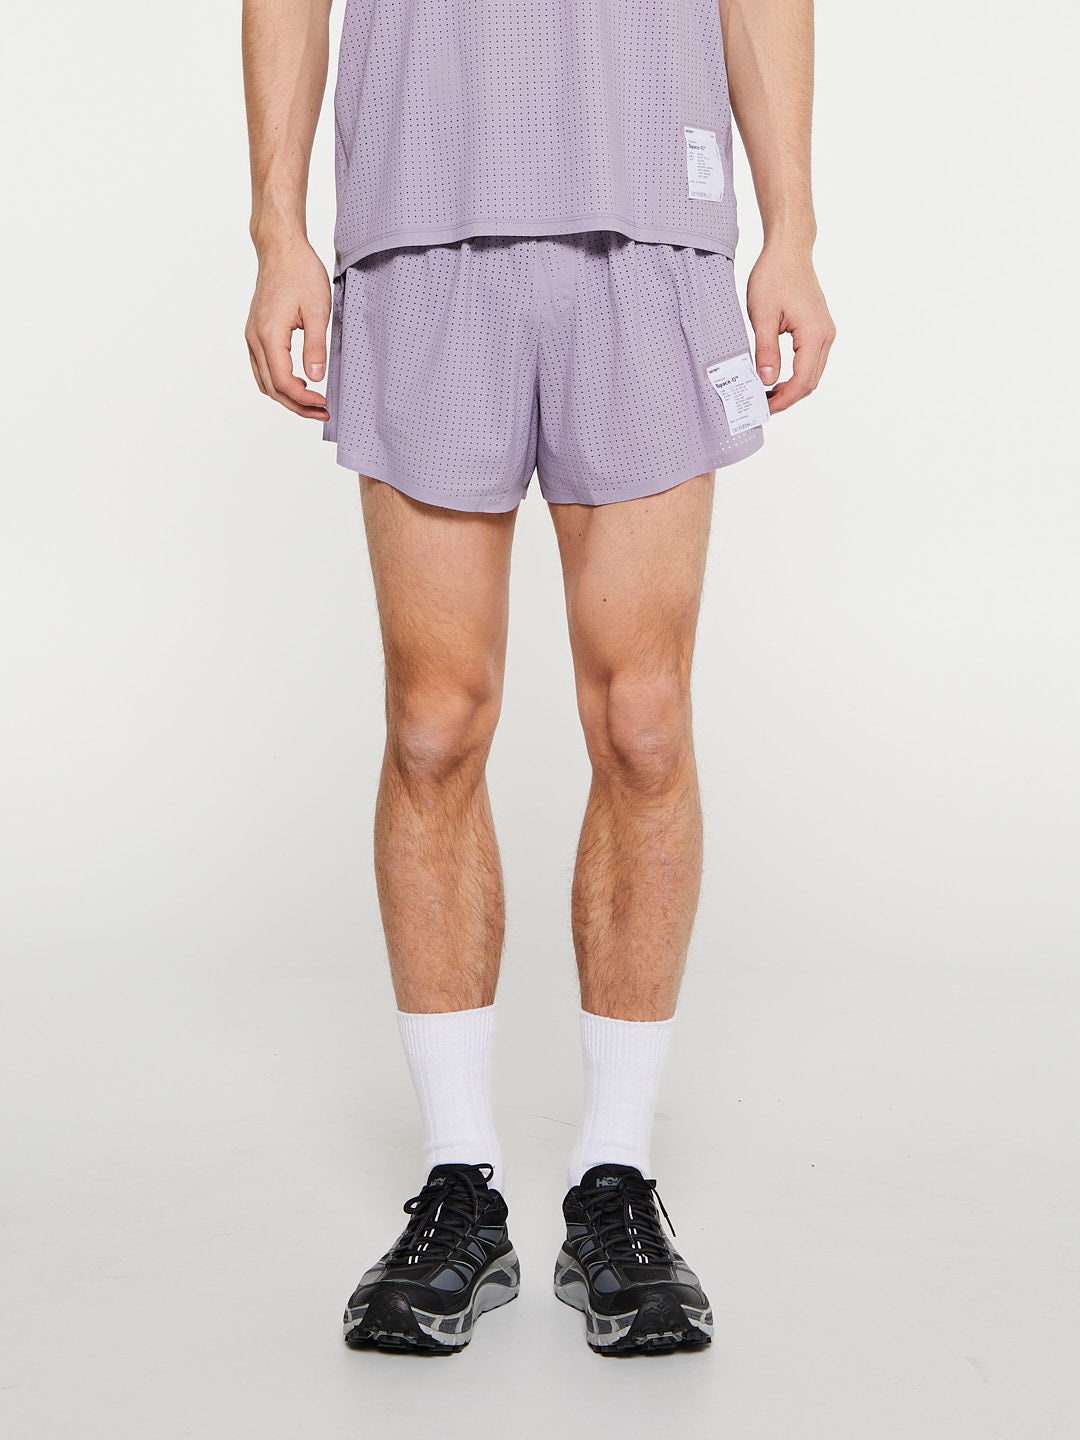 Satisfy - Space-O 2.5" Distance Shorts in Lavender Gray